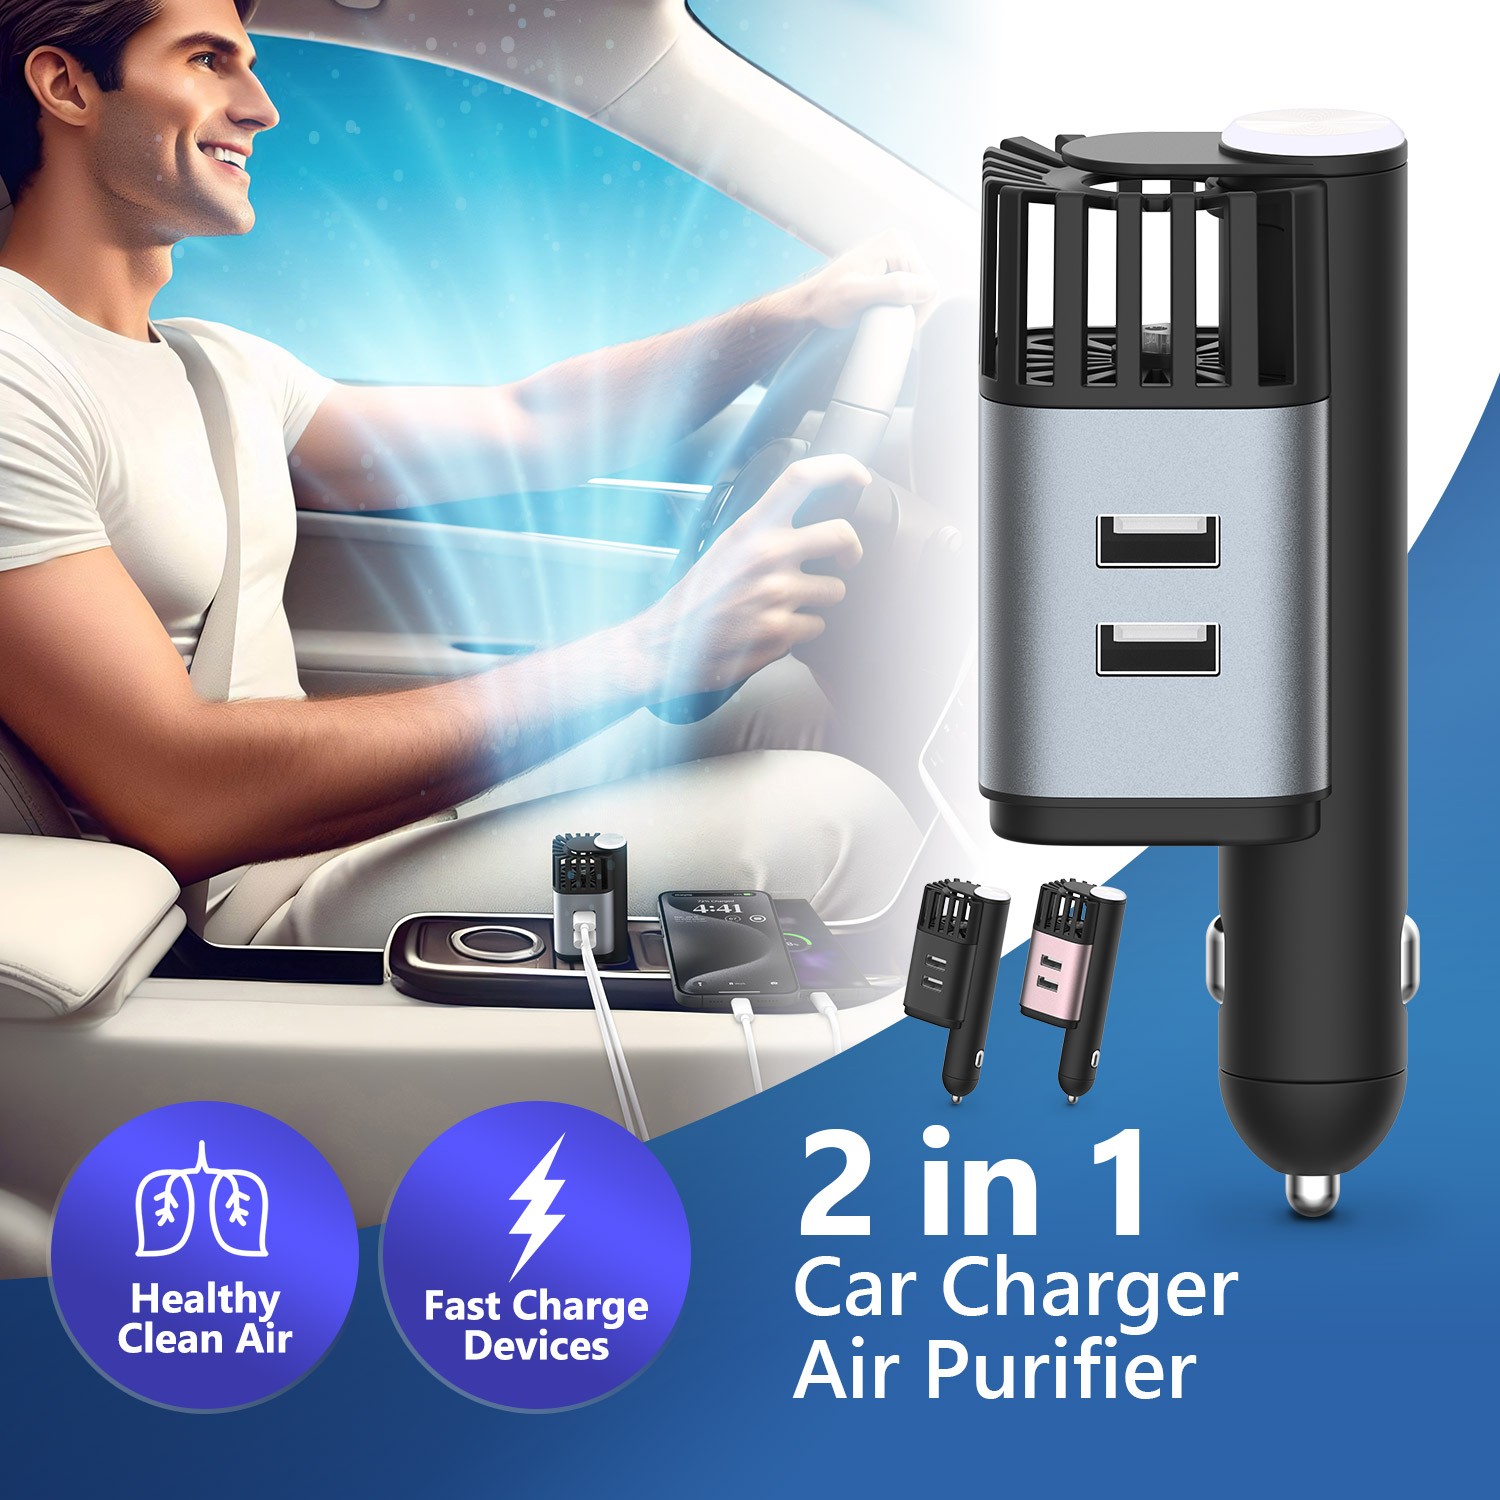 IONKINI 10th Generation 2-in-1 Car Charger Air Purifier Ionizer JO-6310